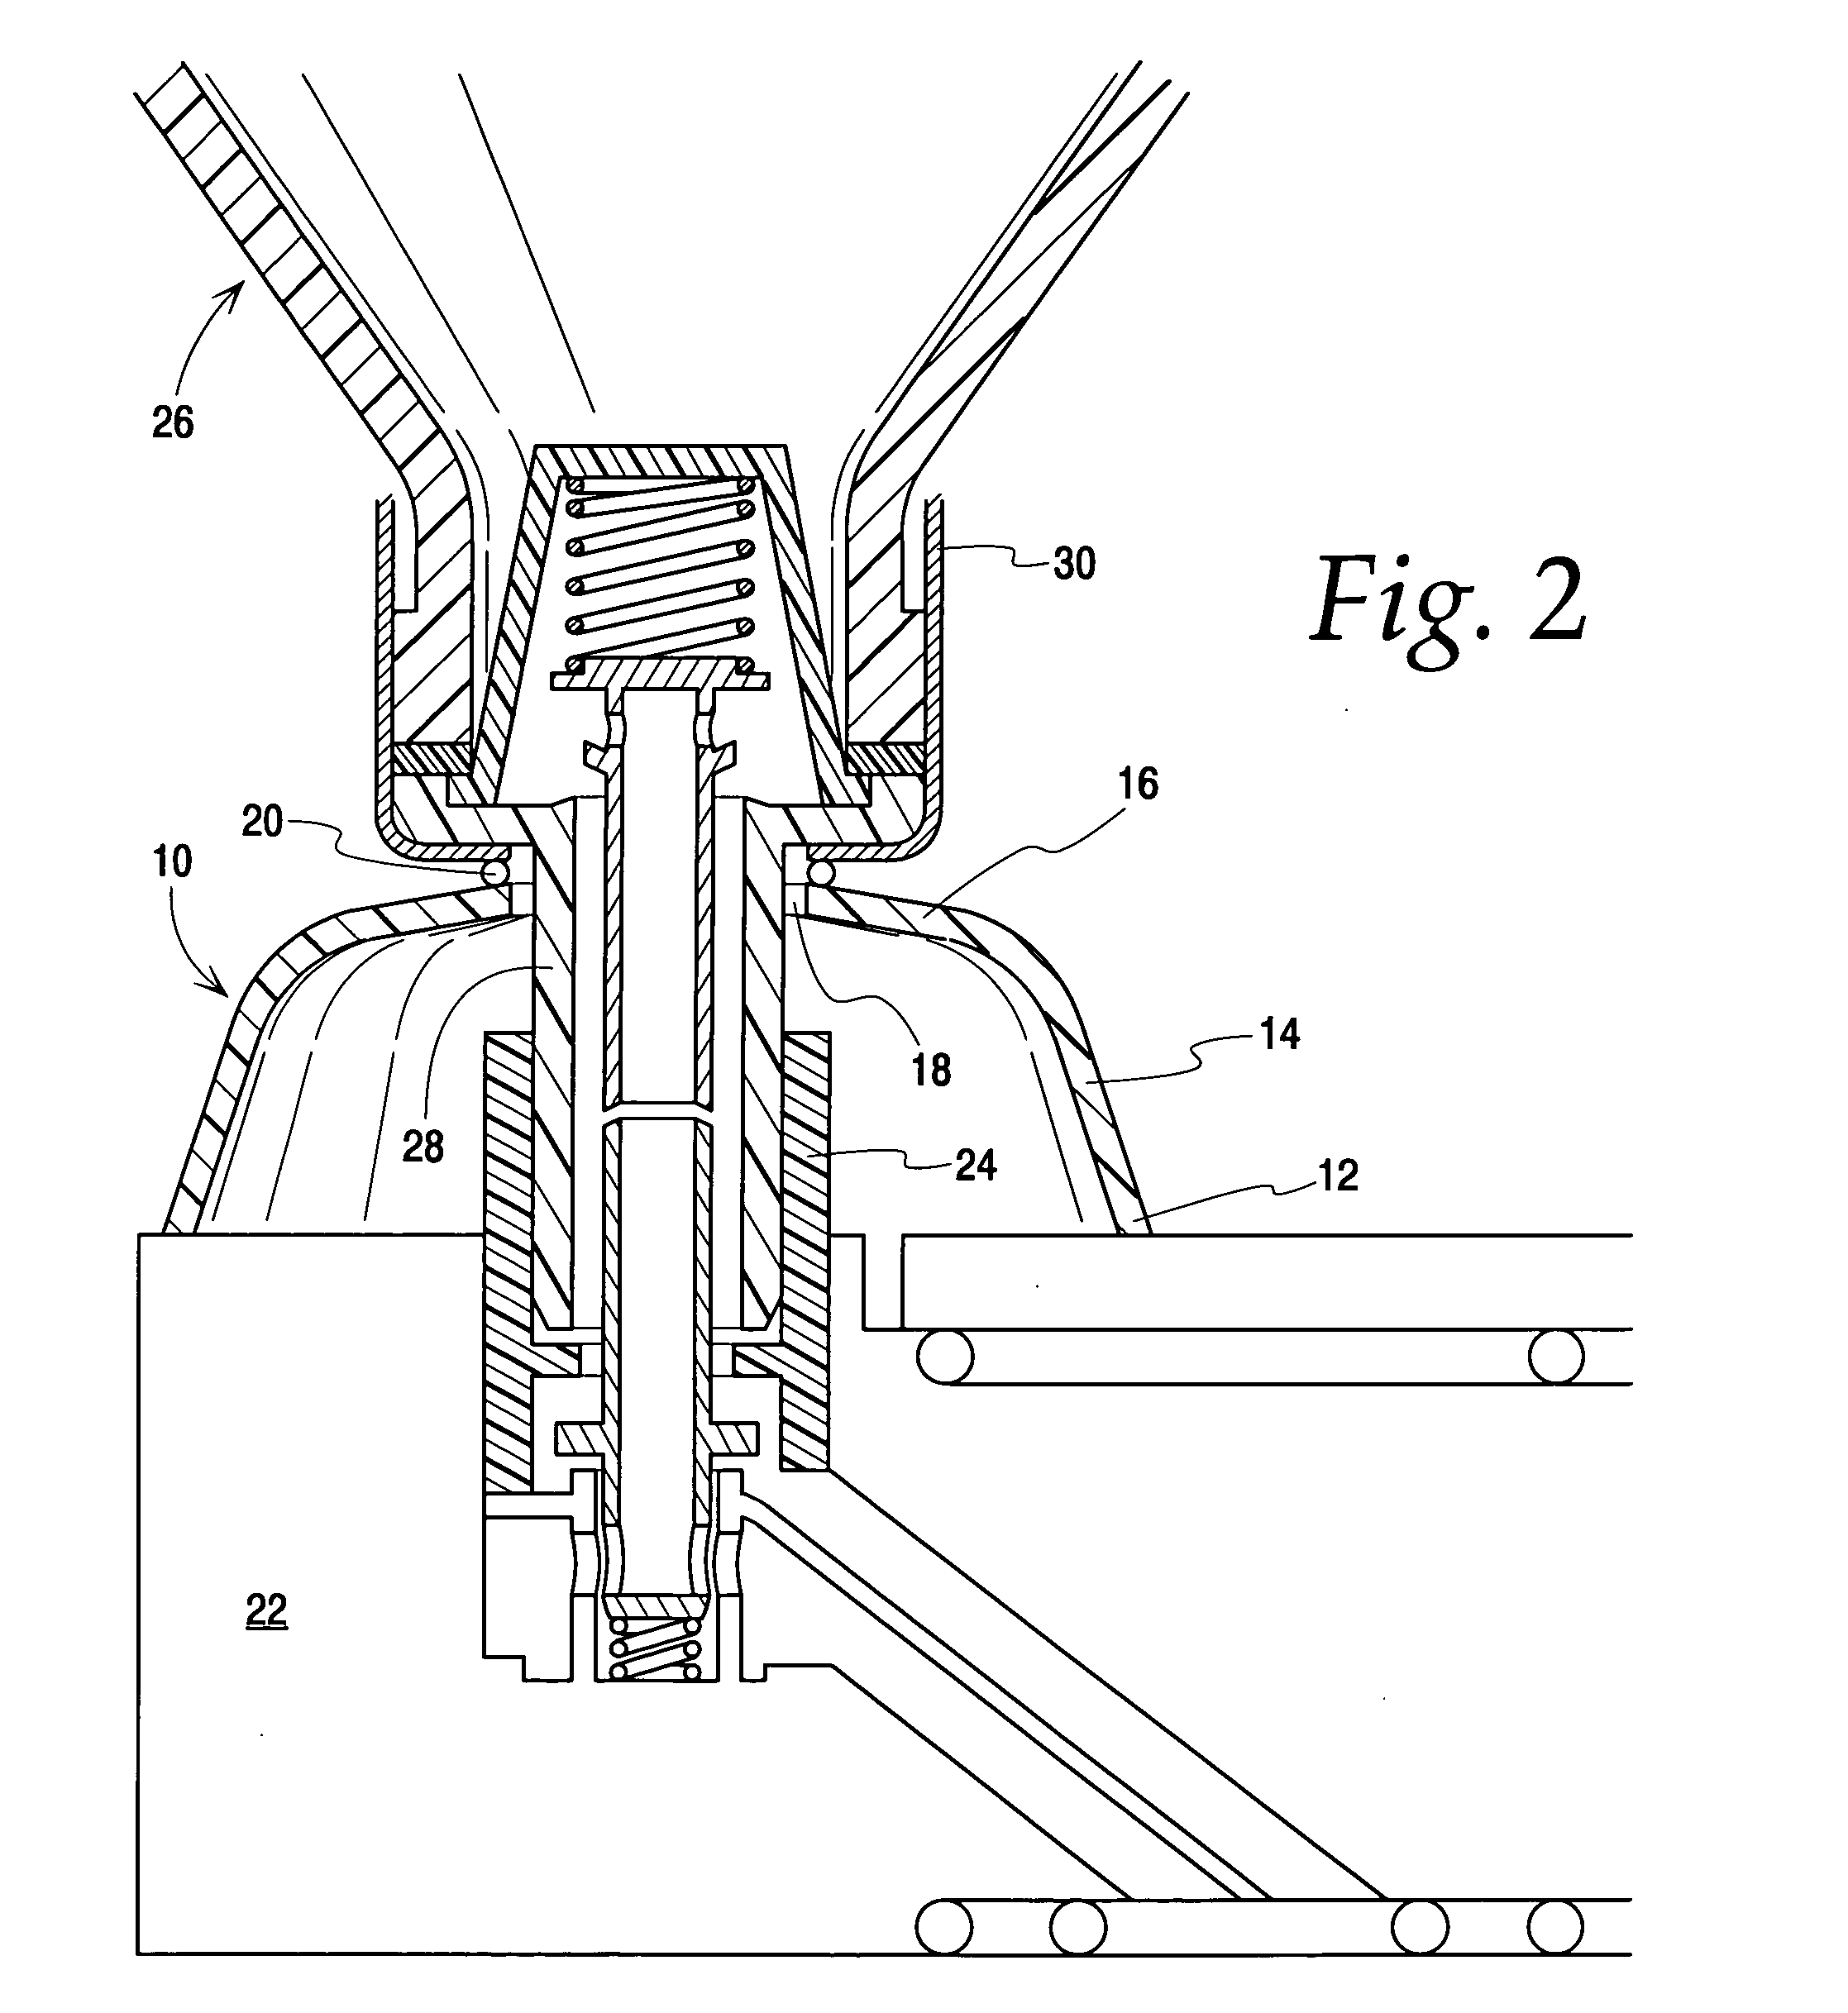 Adapters for use with an anesthetic vaporizer